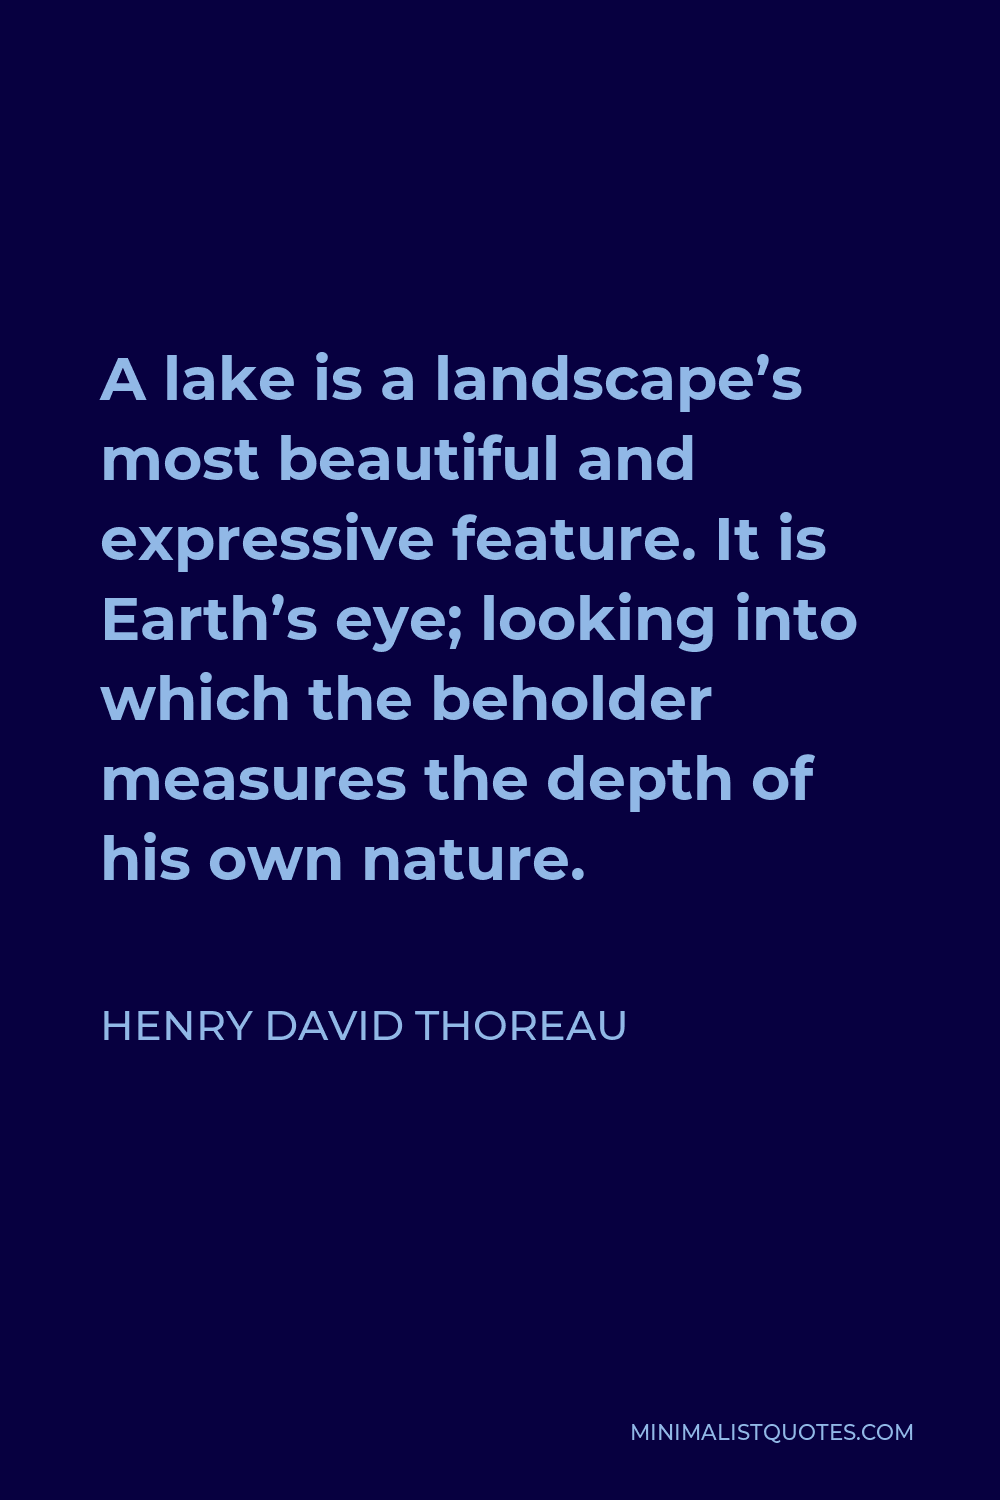 Henry David Thoreau Quote - A lake is a landscape’s most beautiful and expressive feature. It is Earth’s eye; looking into which the beholder measures the depth of his own nature.